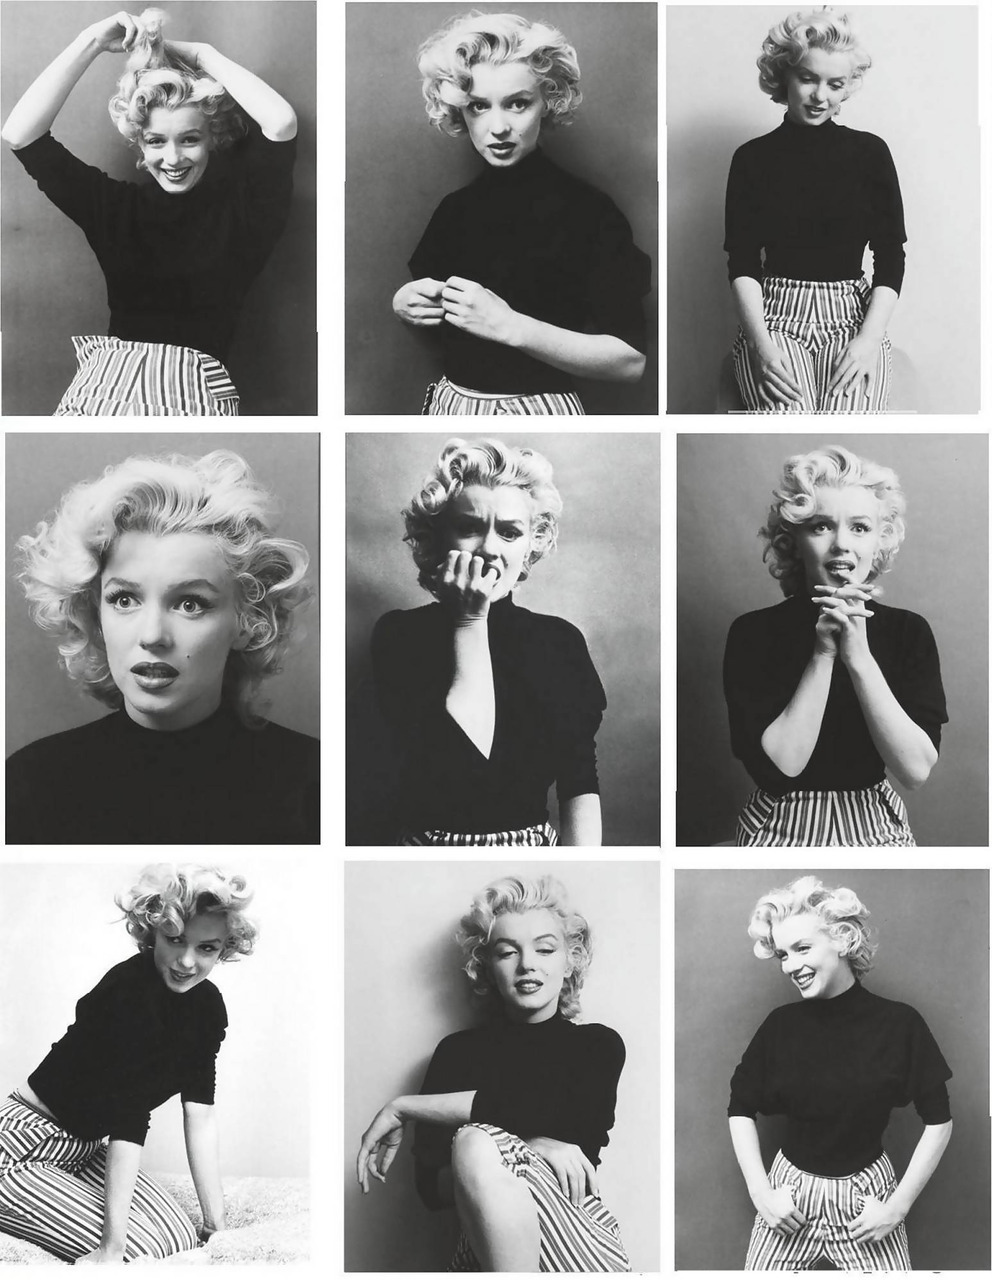 Marilyn Monroe photographed by Ben Ross, Dec 1953